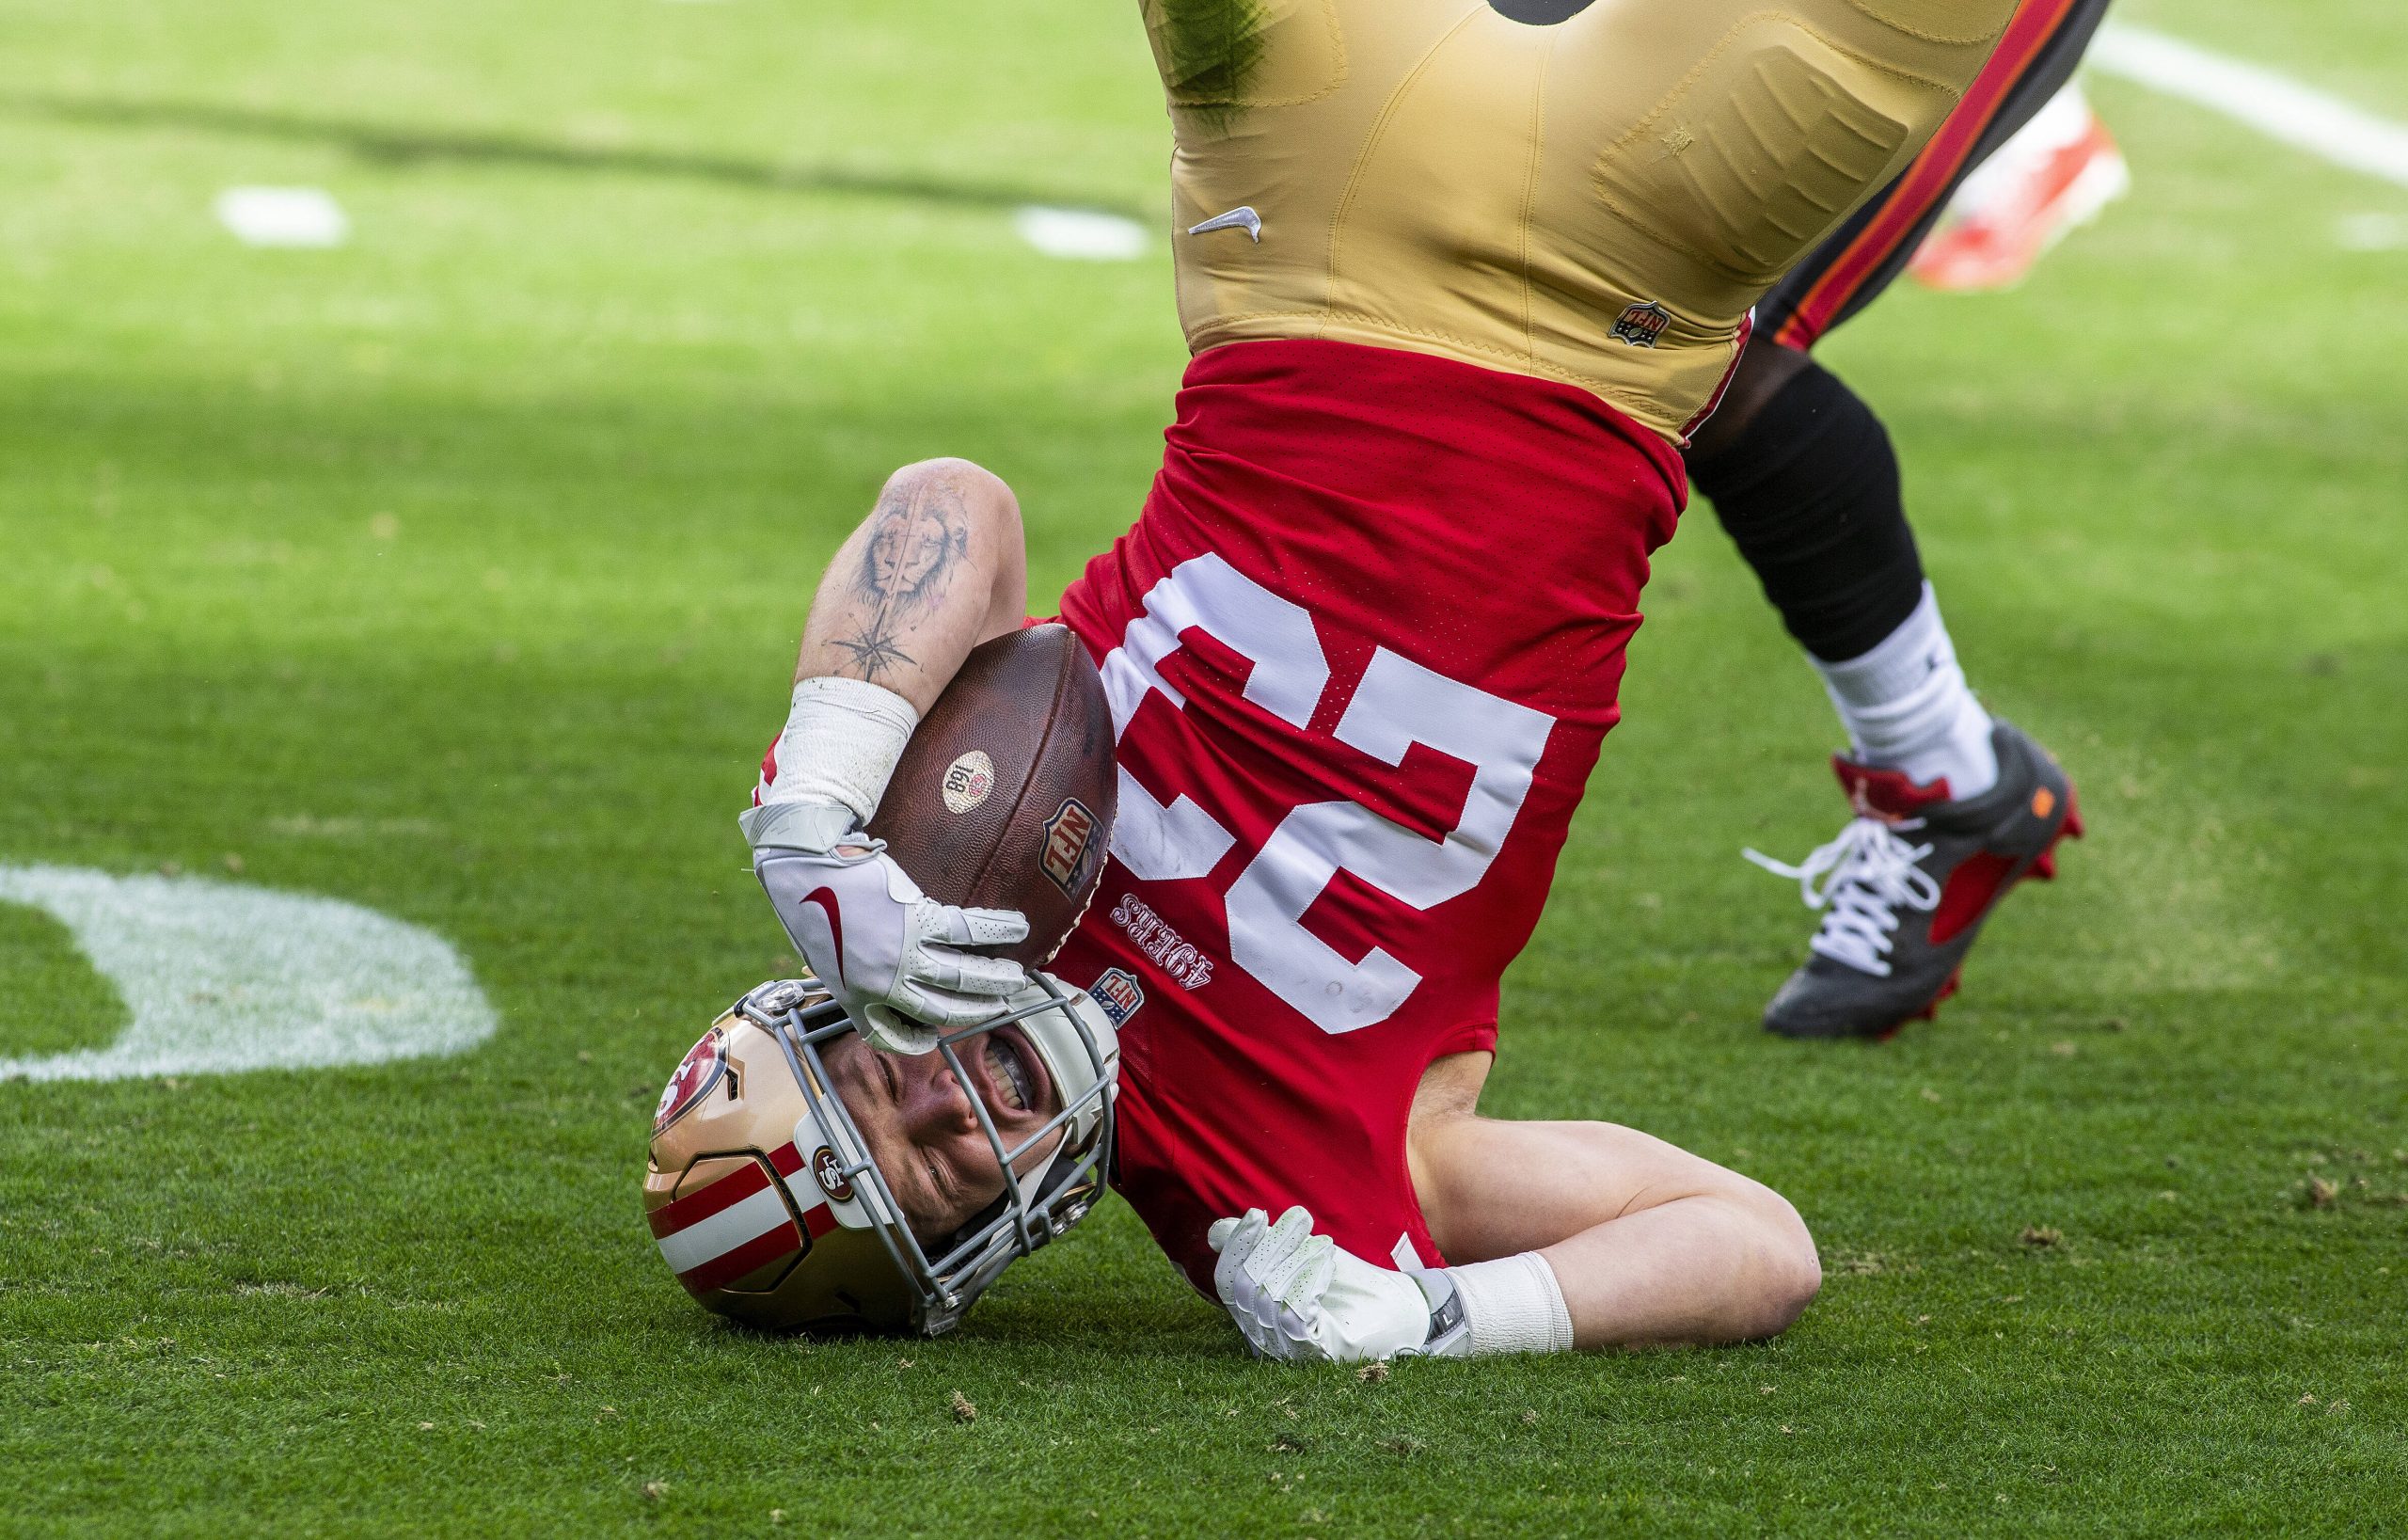 SANTA CLARA, CA - DECEMBER 11: San Francisco 49ers running back Christian McCaffrey 23 gets turned upside down rushing in the first quarter of an NFL, American Football Herren, USA game between the San Francisco 49ers and Tampa Bay Buccaneers on December 11, 2022, at Levis Stadium, in Santa Clara, CA. Photo by Tony Ding/Icon Sportswire NFL: DEC 11 Buccaneers at 49ers Icon46520221211025